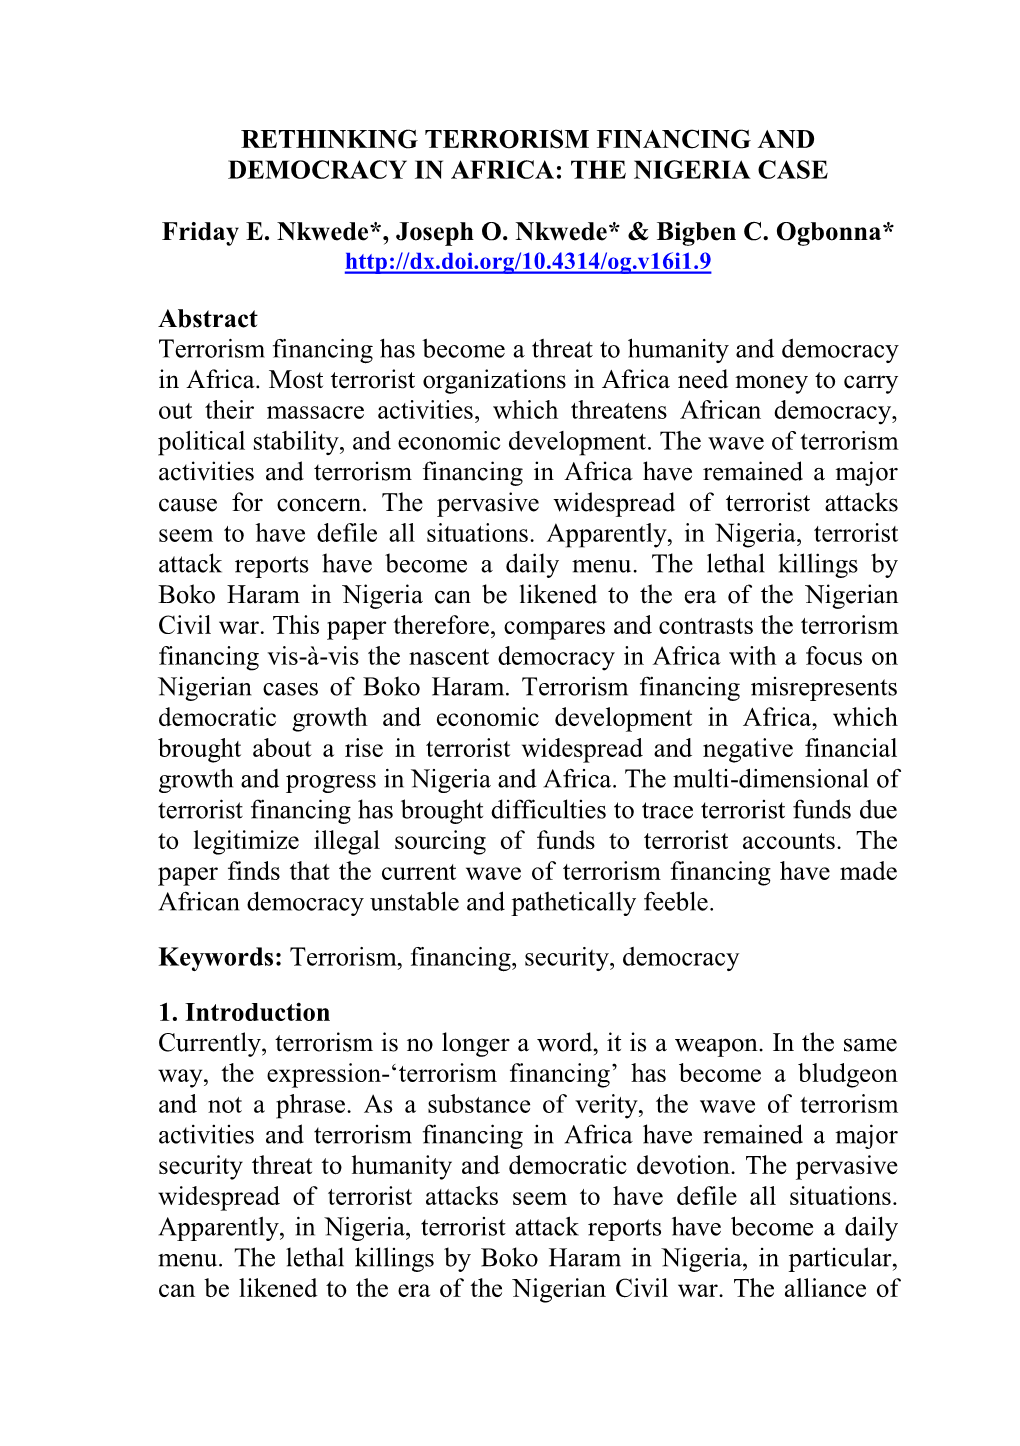 Rethinking Terrorism Financing and Democracy in Africa: the Nigeria Case